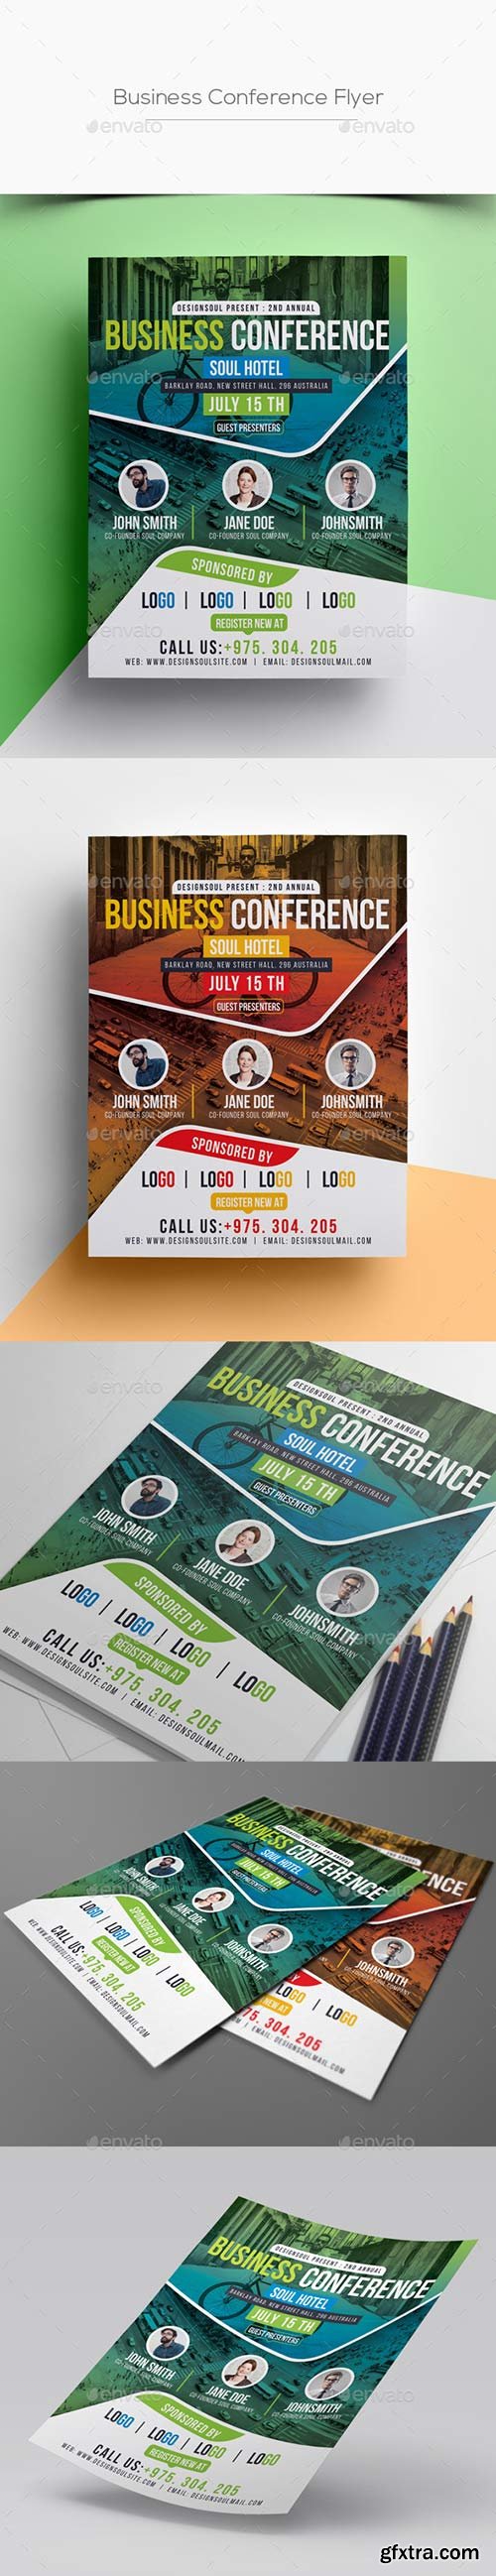 Graphicriver - Business Conference Flyer 20353106